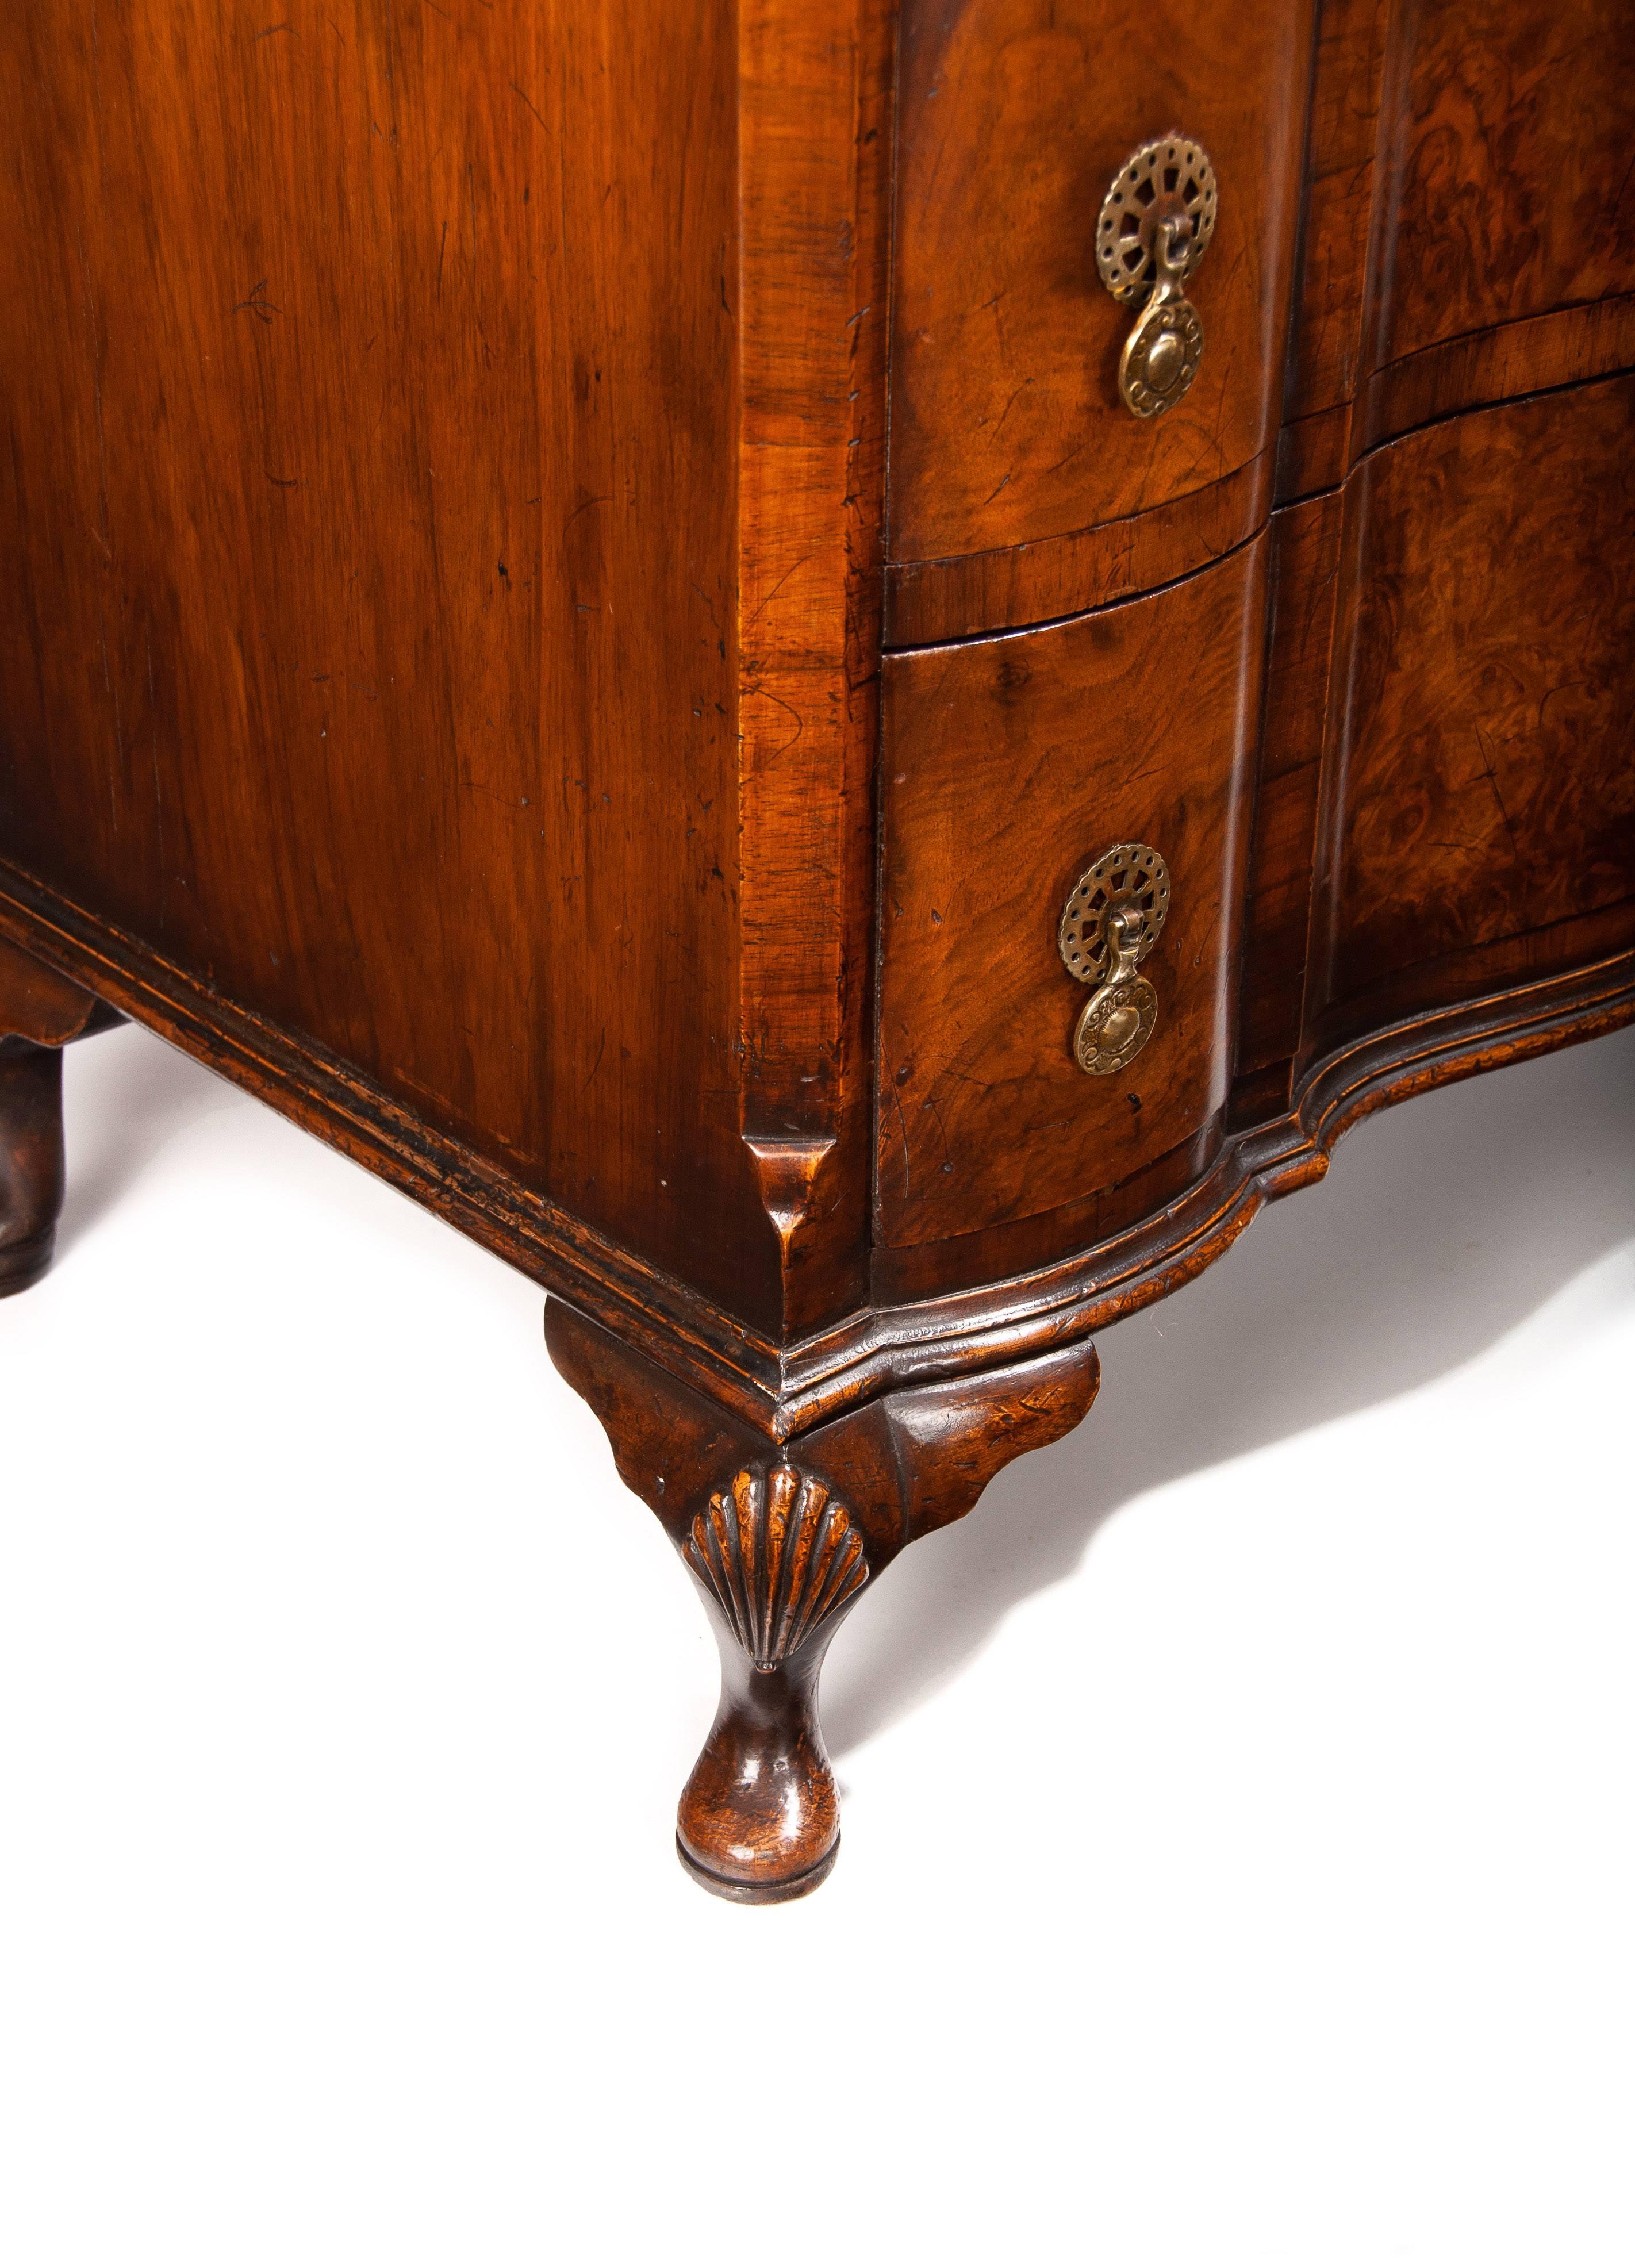 Queen Anne Antique Walnut Chest of Drawers of an Elegant Shaped Front Design